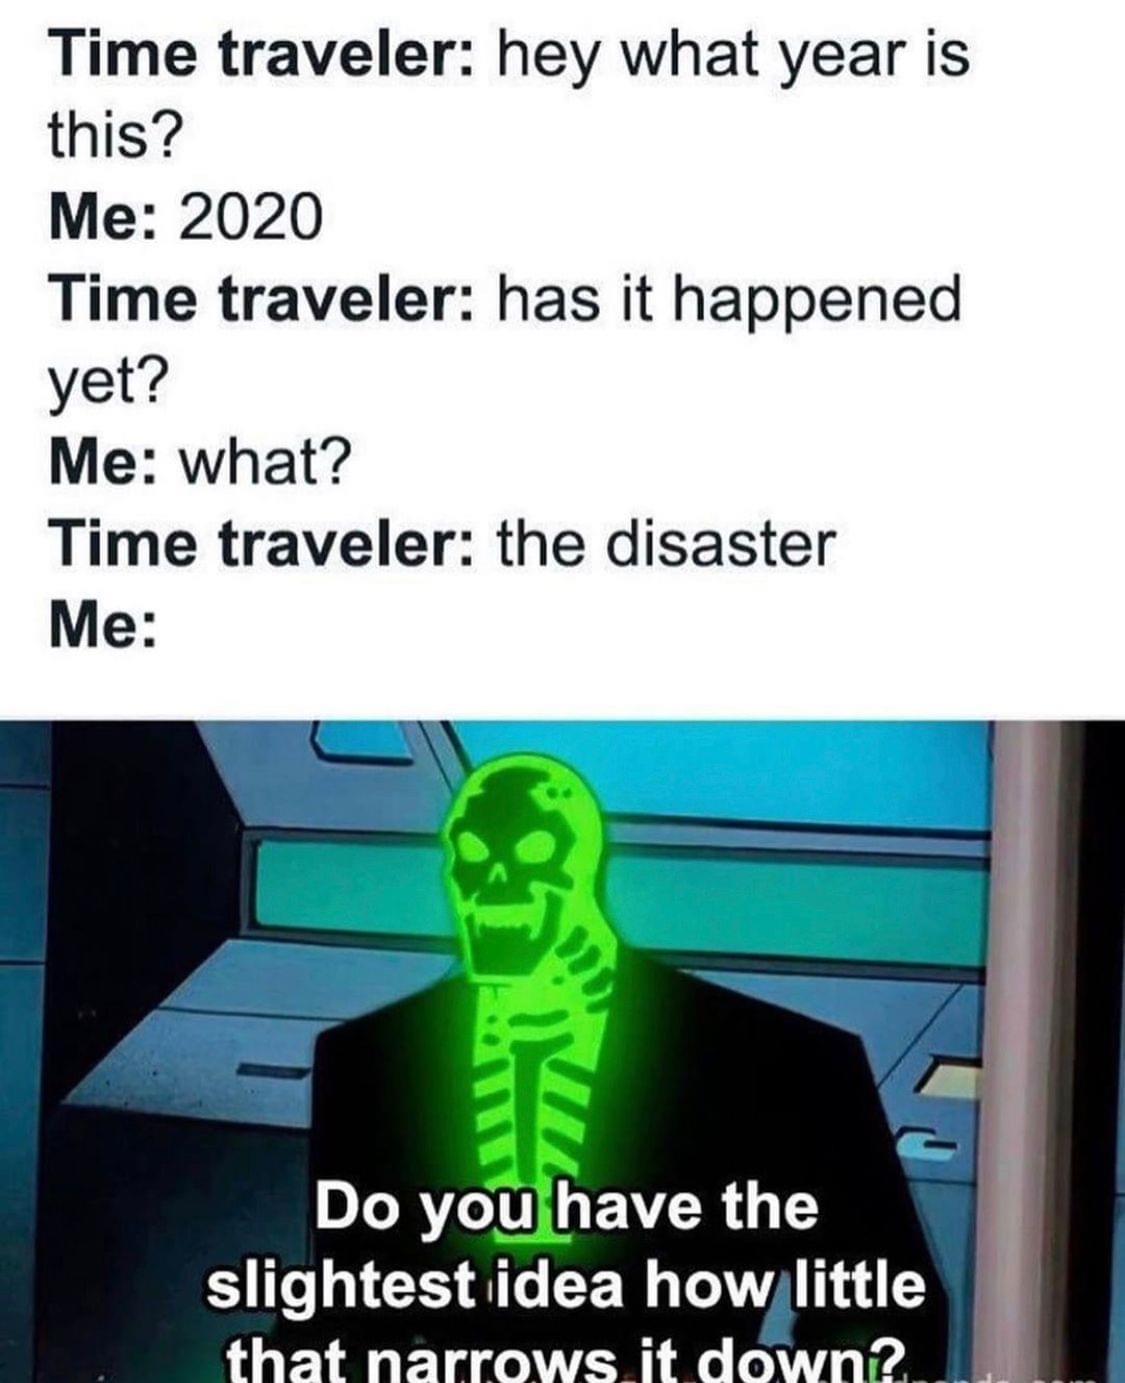 do you have any idea how little - Time traveler hey what year is this? Me 2020 Time traveler has it happened yet? Me what? Time traveler the disaster Me Do you have the slightest idea how little that narrows it down?